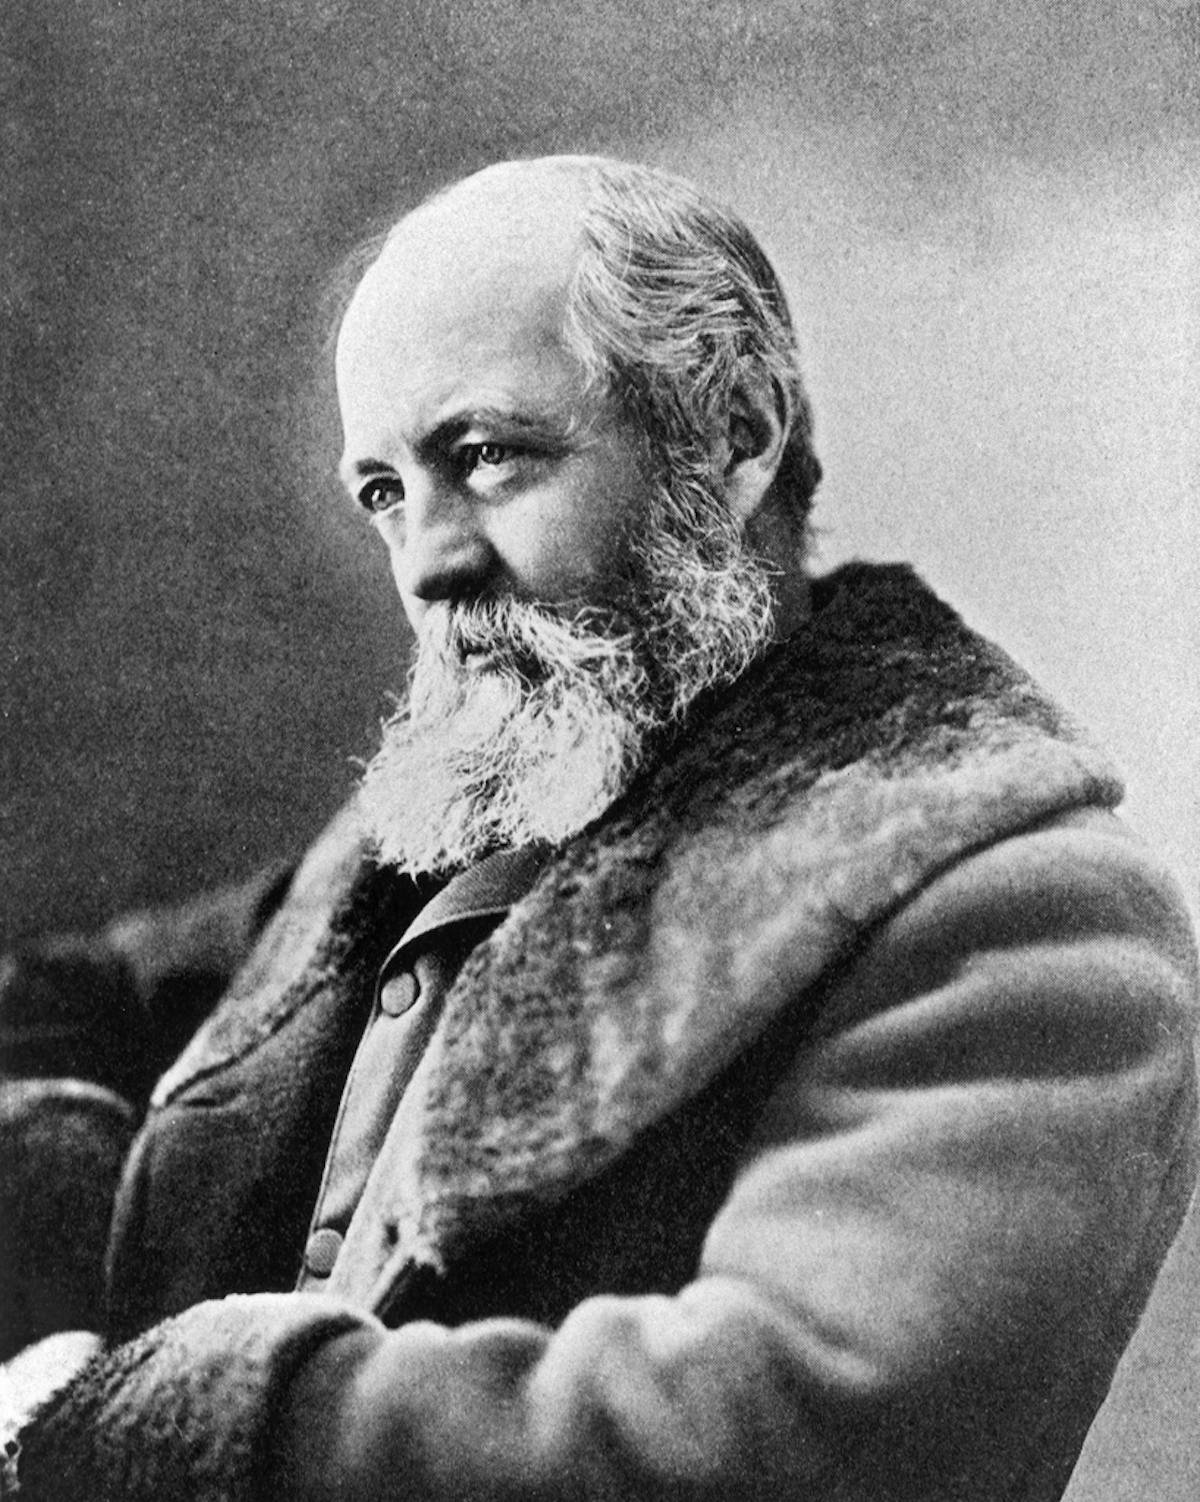 The TCLF will honor Frederick Law Olmsted, the father of landscape architecture, with a new digital guide ahead of his 200th birthday | News